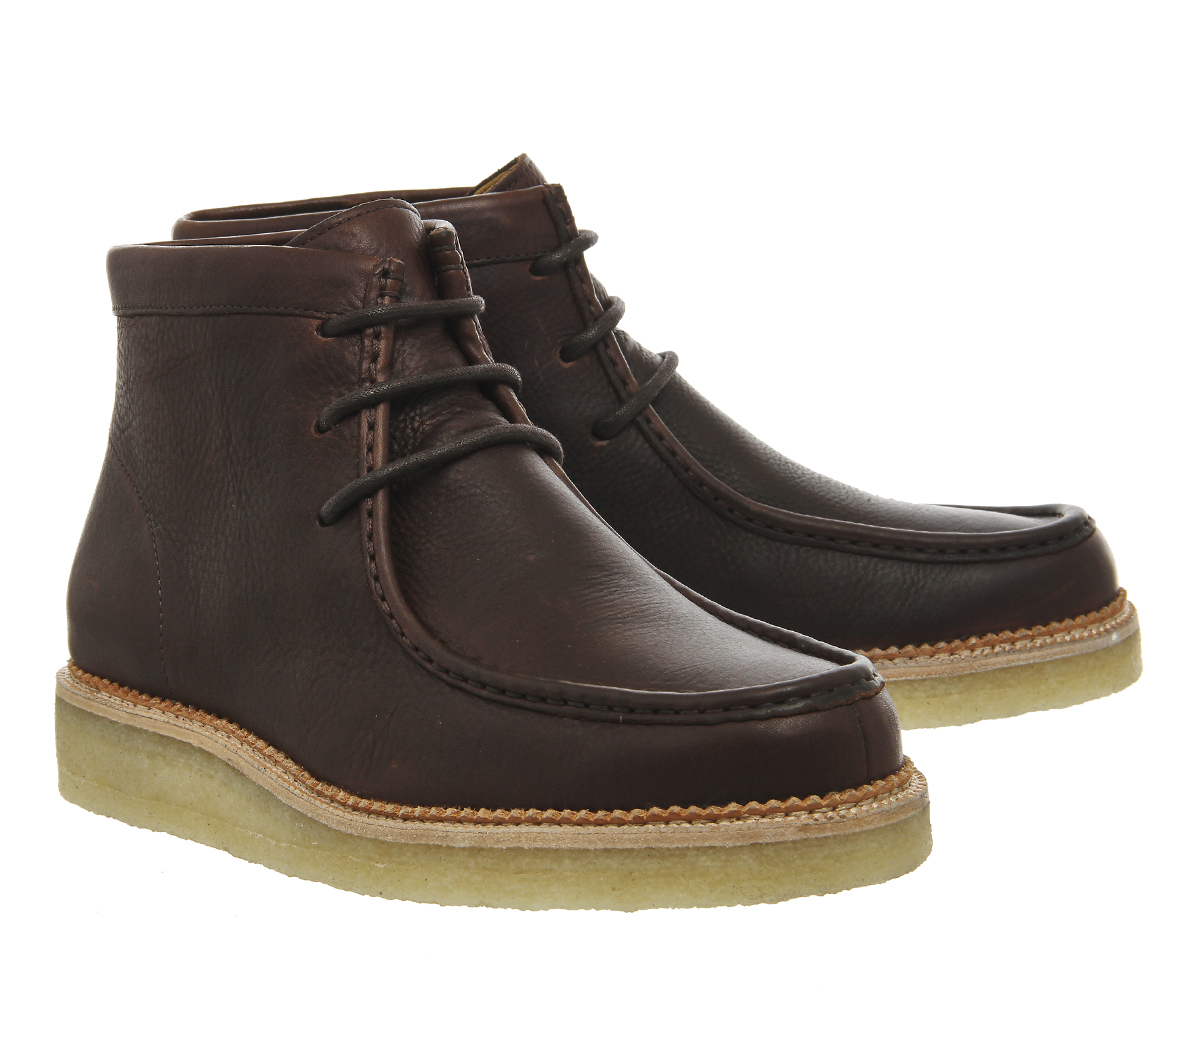 Clarks Leather Beckery Hike Boot in Brown for Men - Lyst